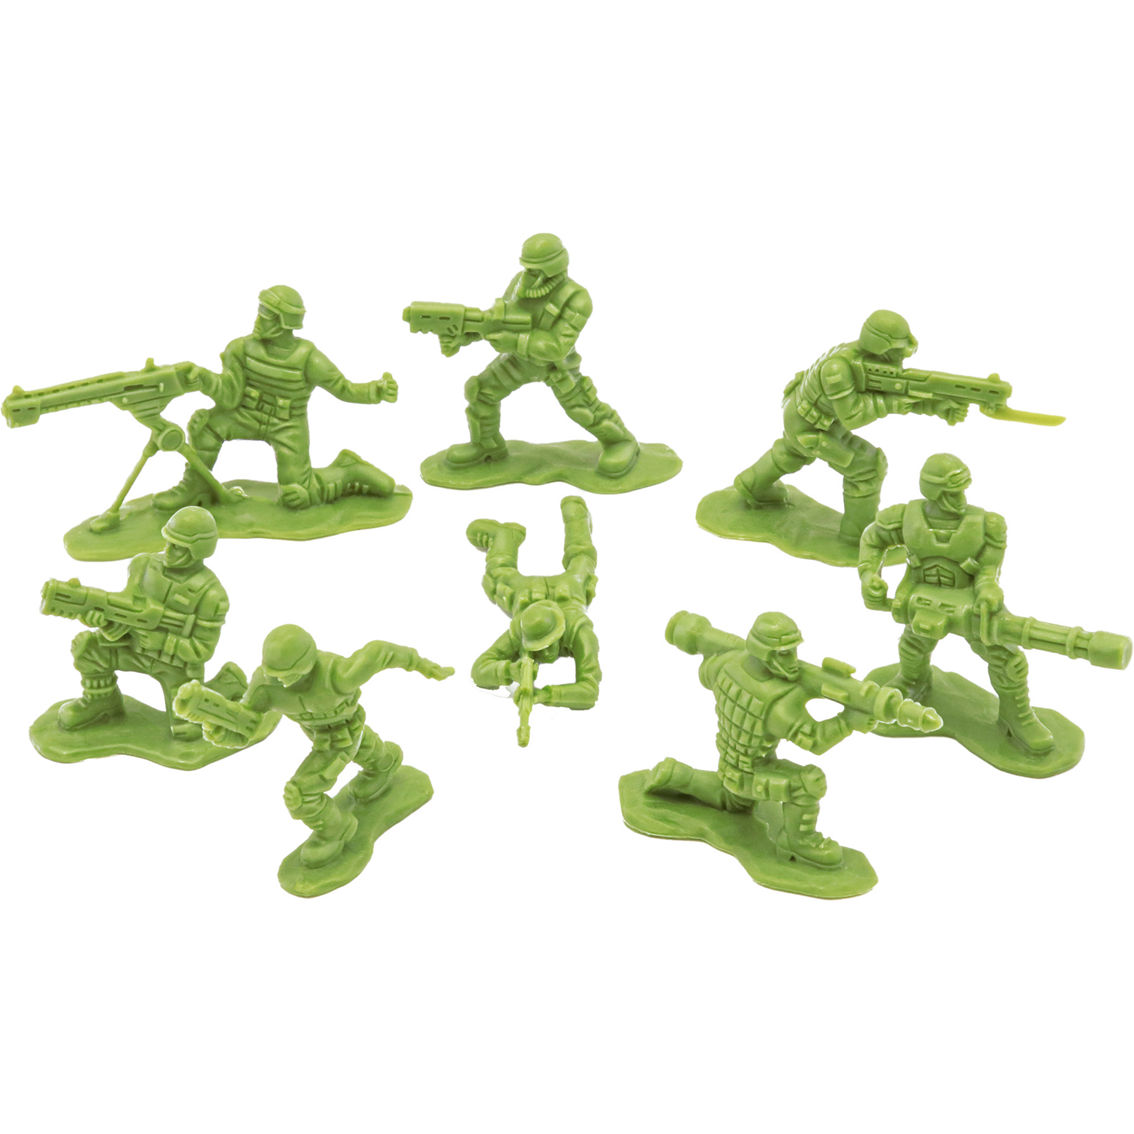 Lanard The Corps Universe Army 104 pc. Set with Troop Army and Battle Base - Image 5 of 5